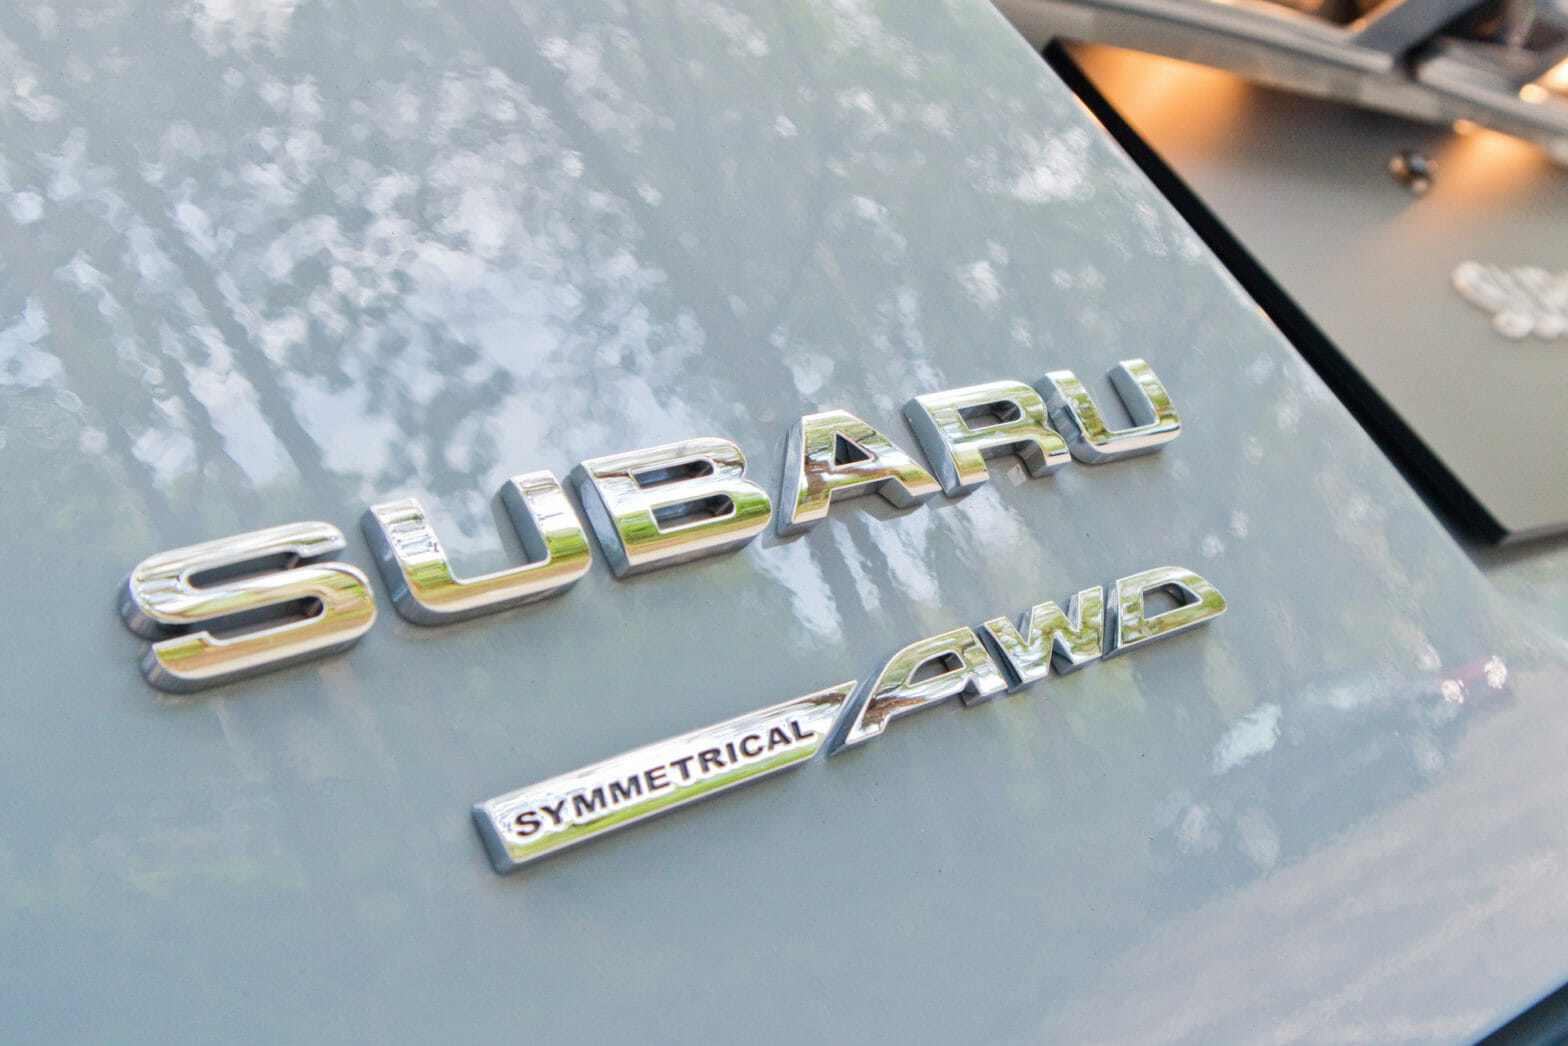 Subaru Safety Features Everything You Need To Know VehicleHistory